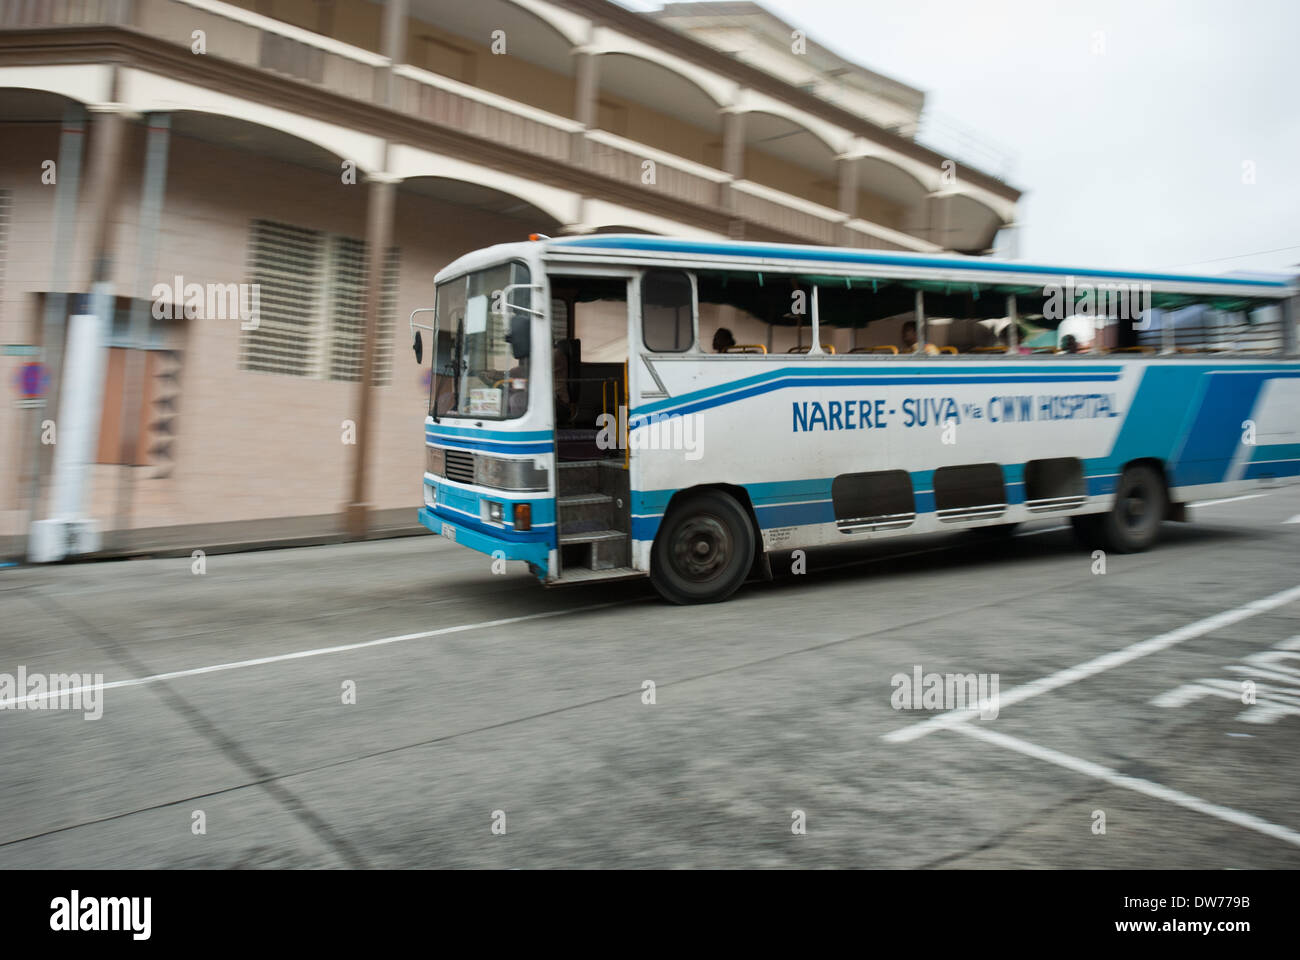 A bus speeds through the hilly back streets of Suva, Fiji's capital city on the pacific island of Viti Levu. Stock Photo